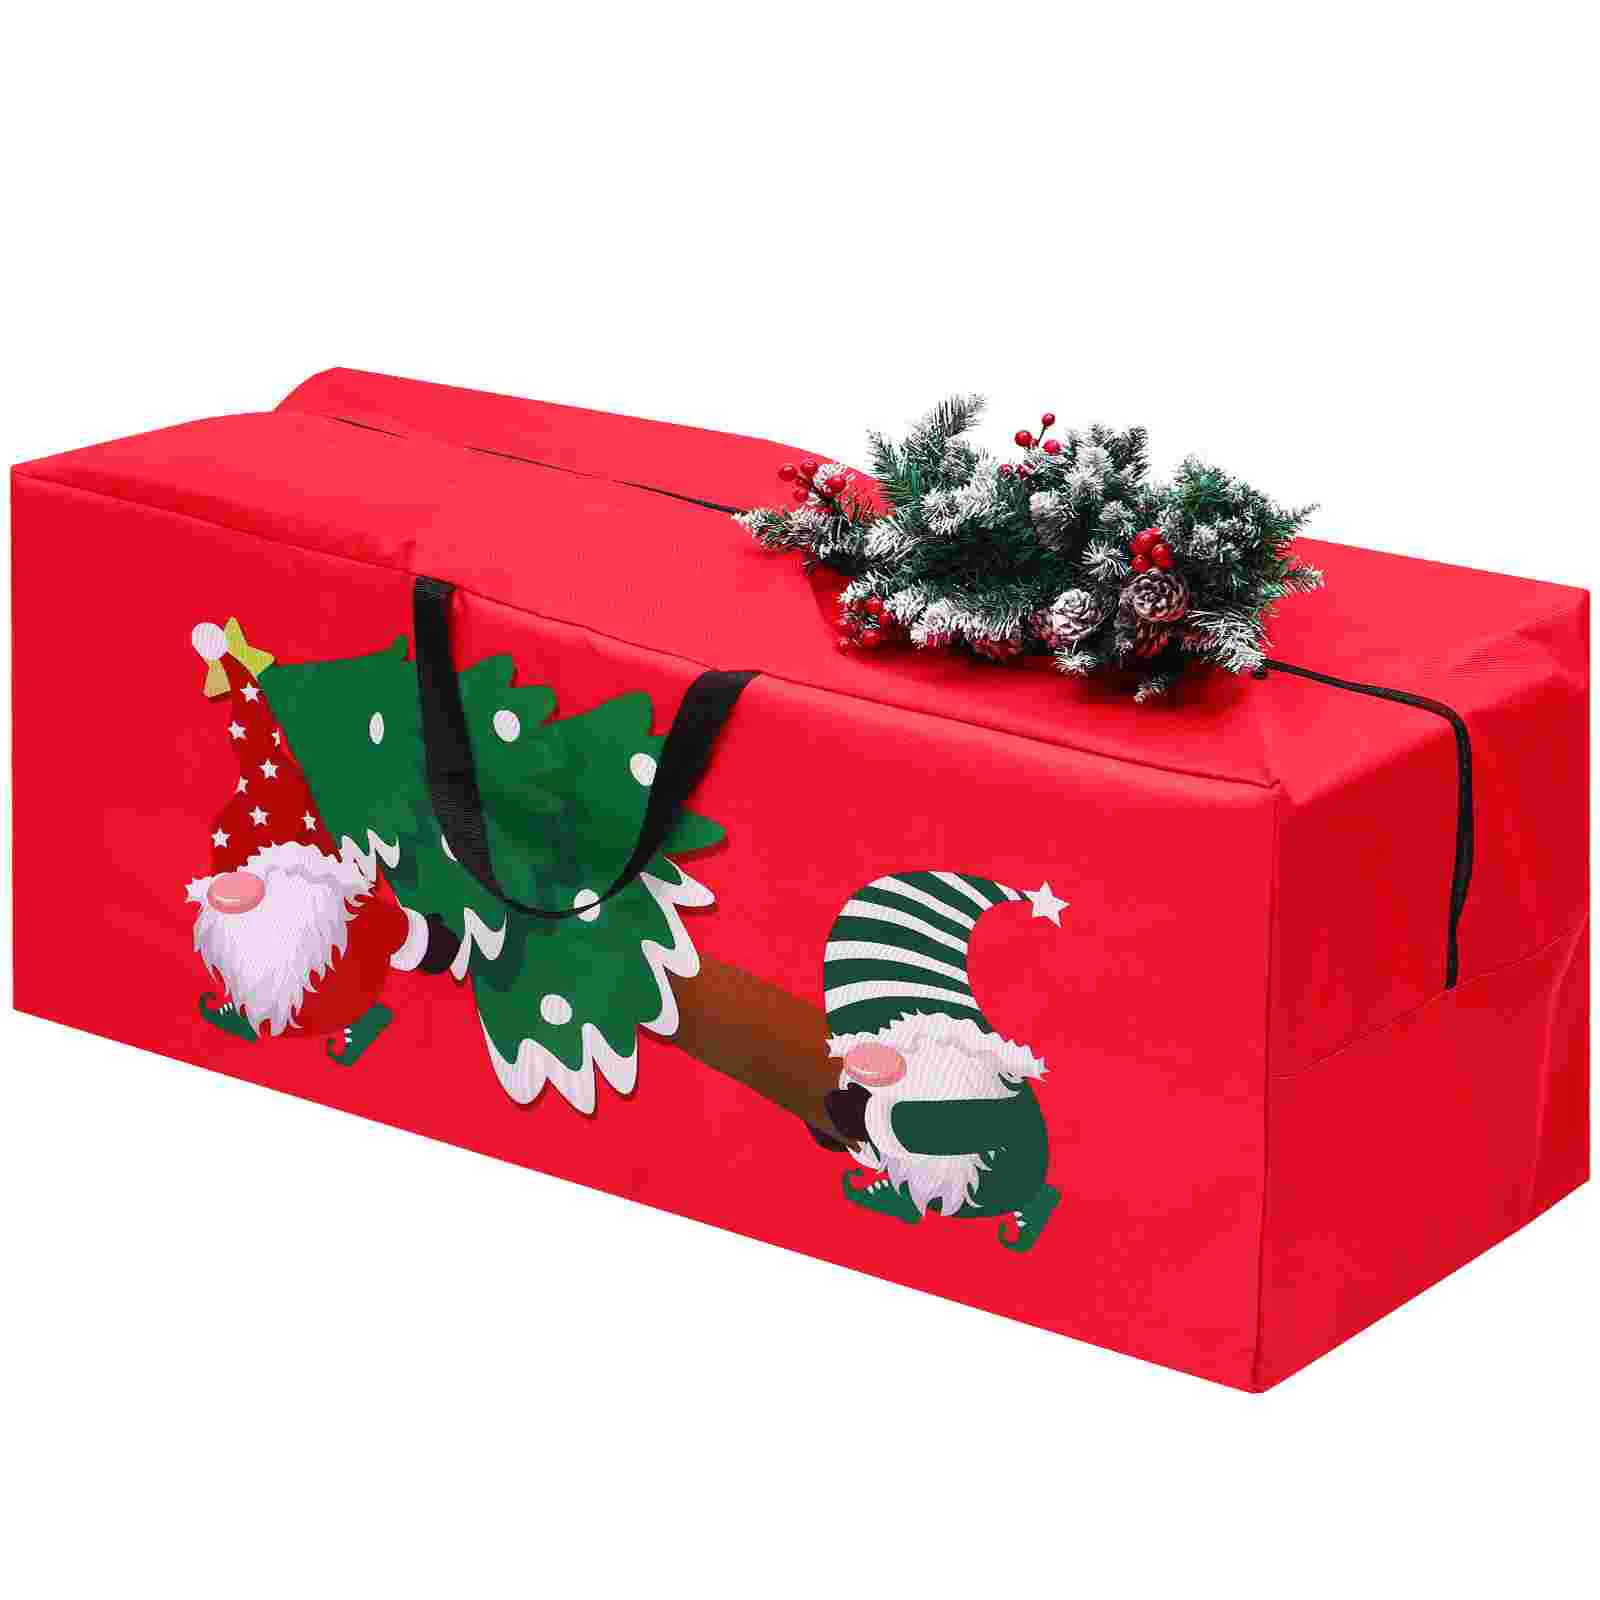 

Christmas Tree Storage Large Box Supplies 9Ft Disassembled Container Zippered Zipper Moving Decorations Artificial Holiday